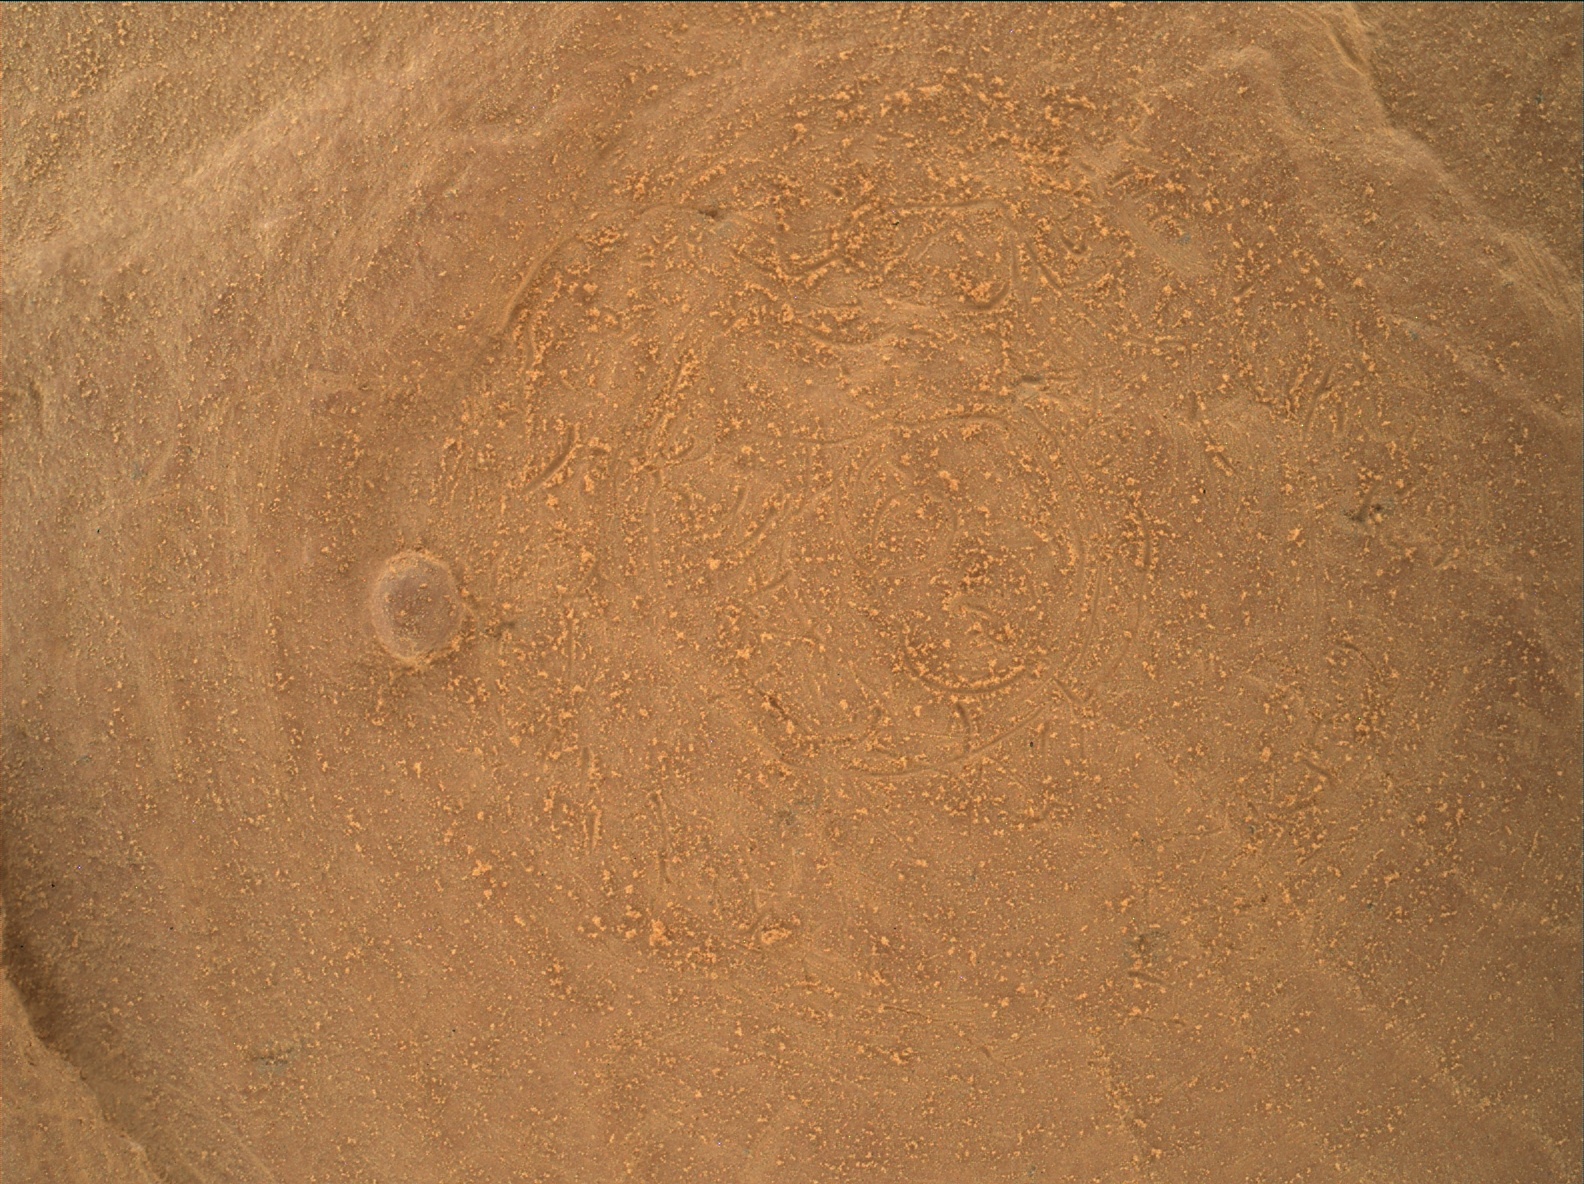 Nasa's Mars rover Curiosity acquired this image using its Mars Hand Lens Imager (MAHLI) on Sol 1739